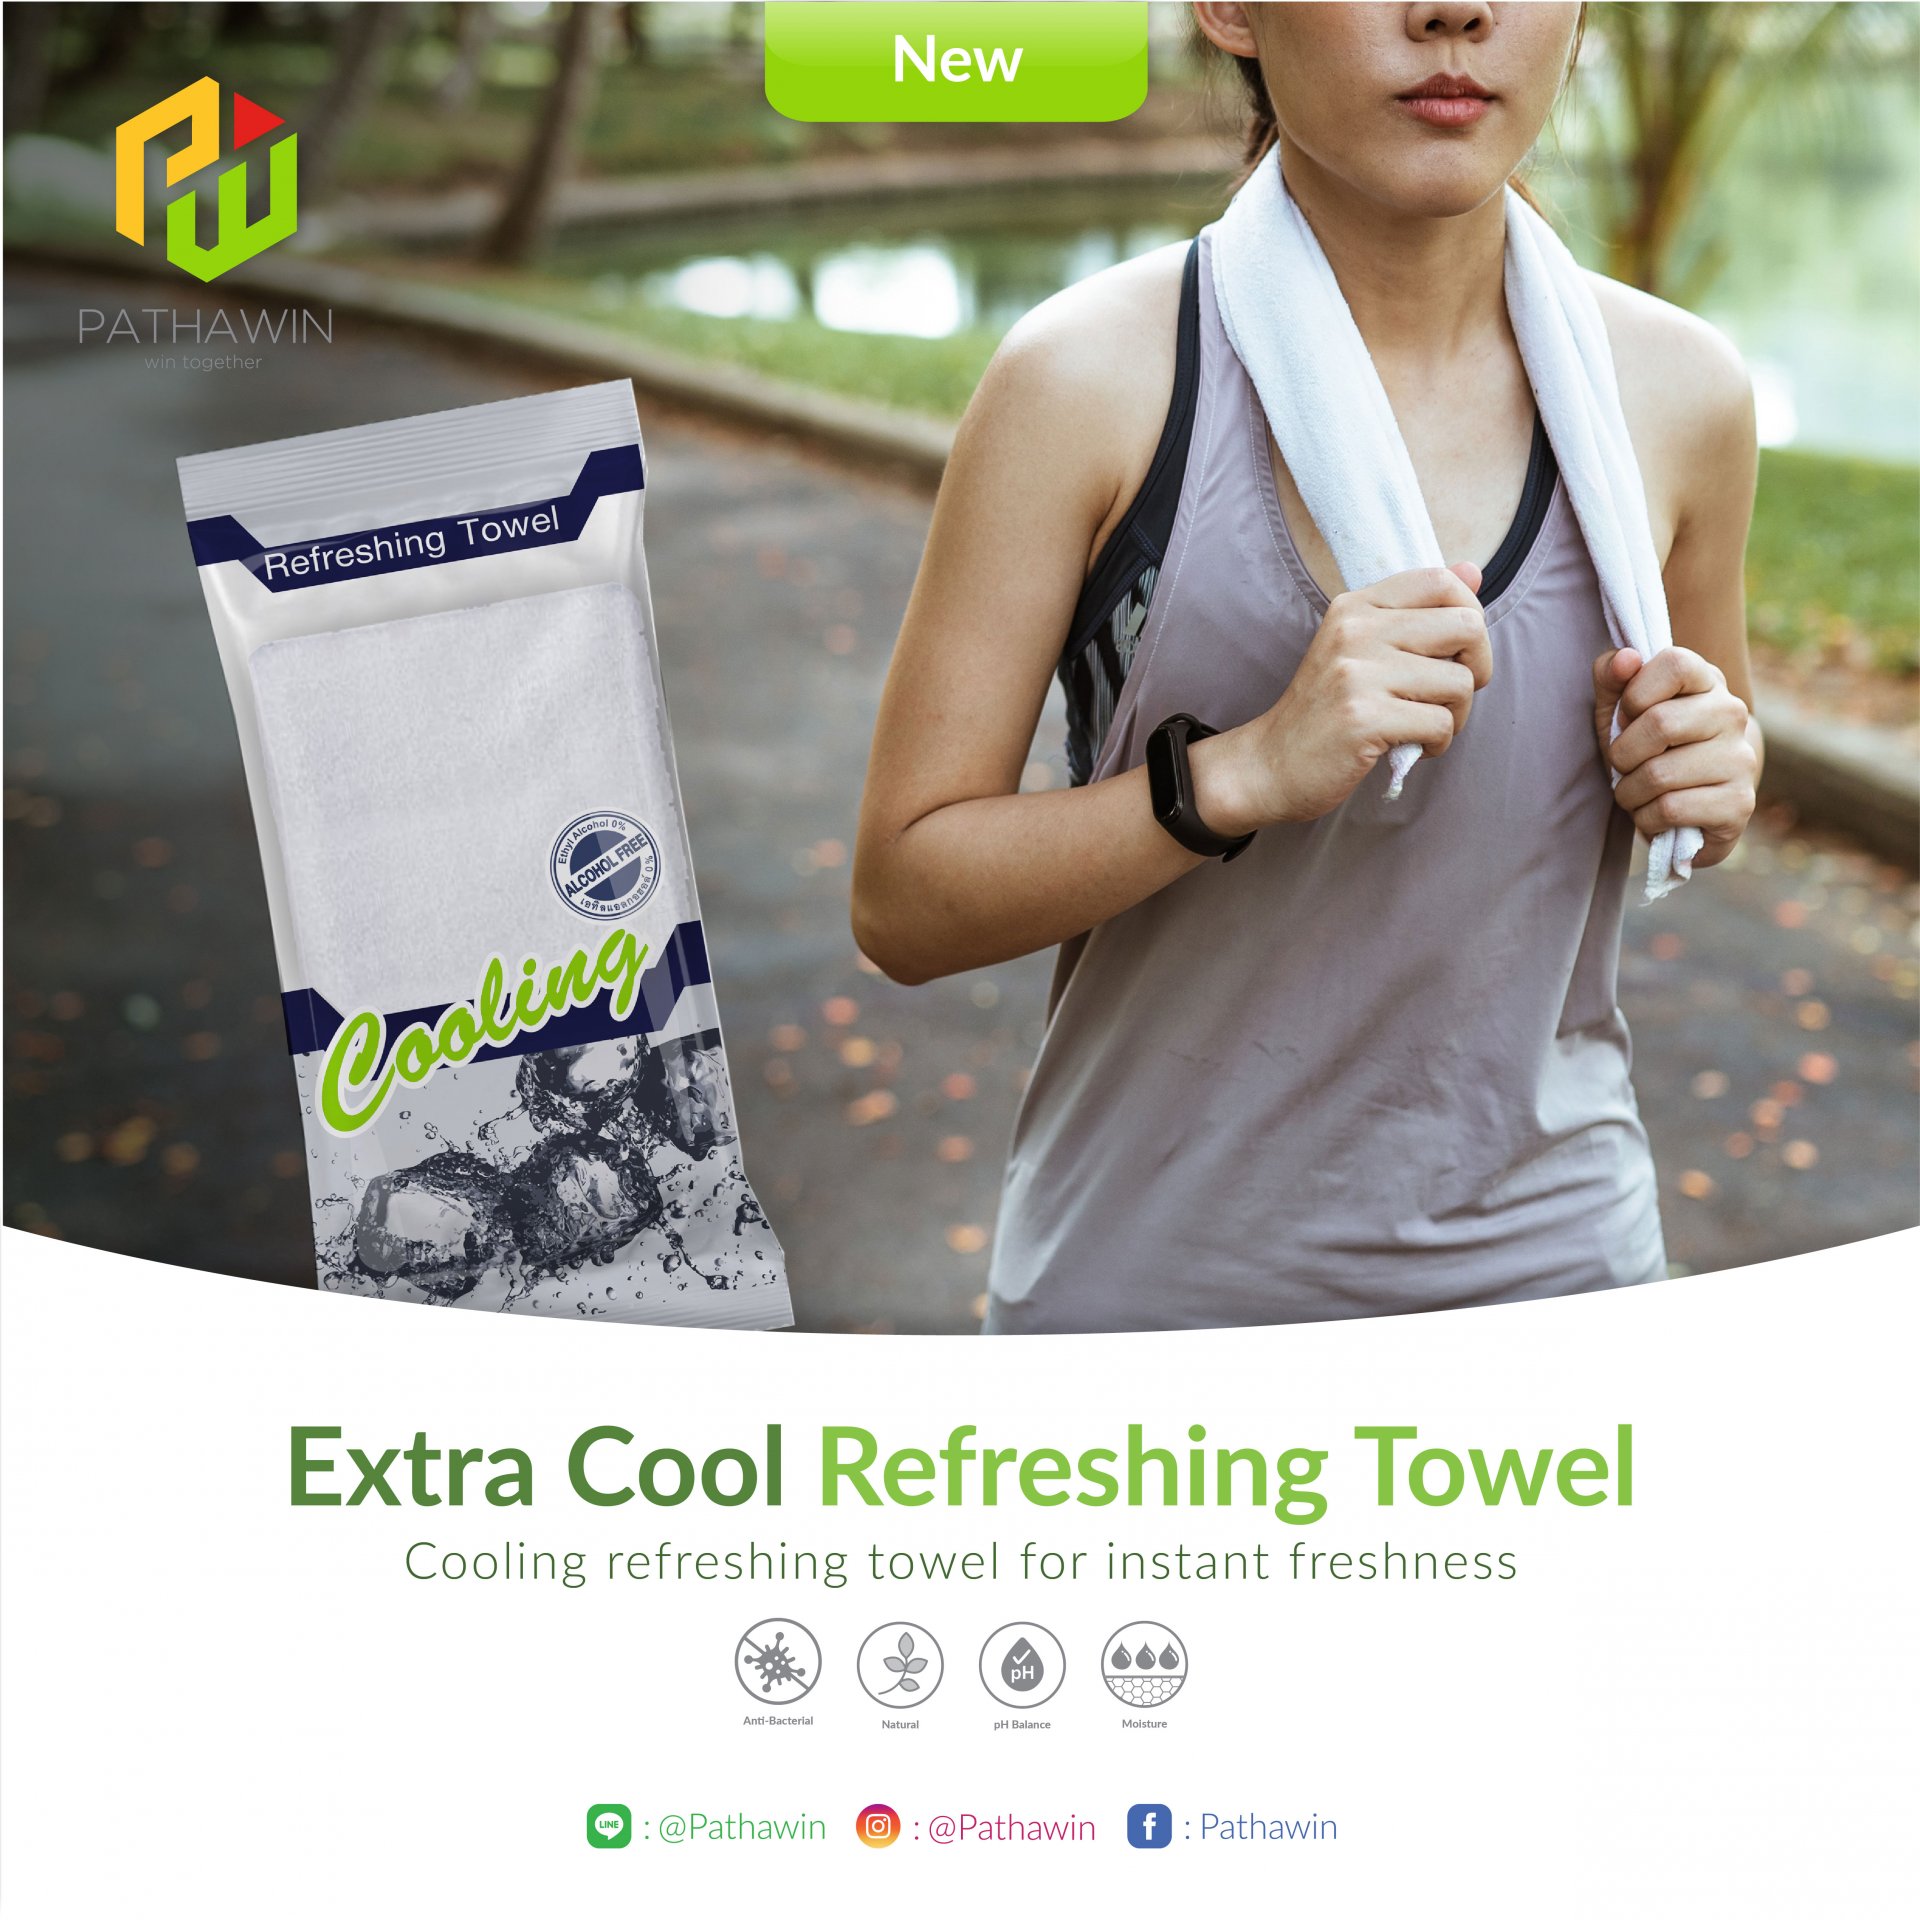 Extra Cool Refreshing Towel